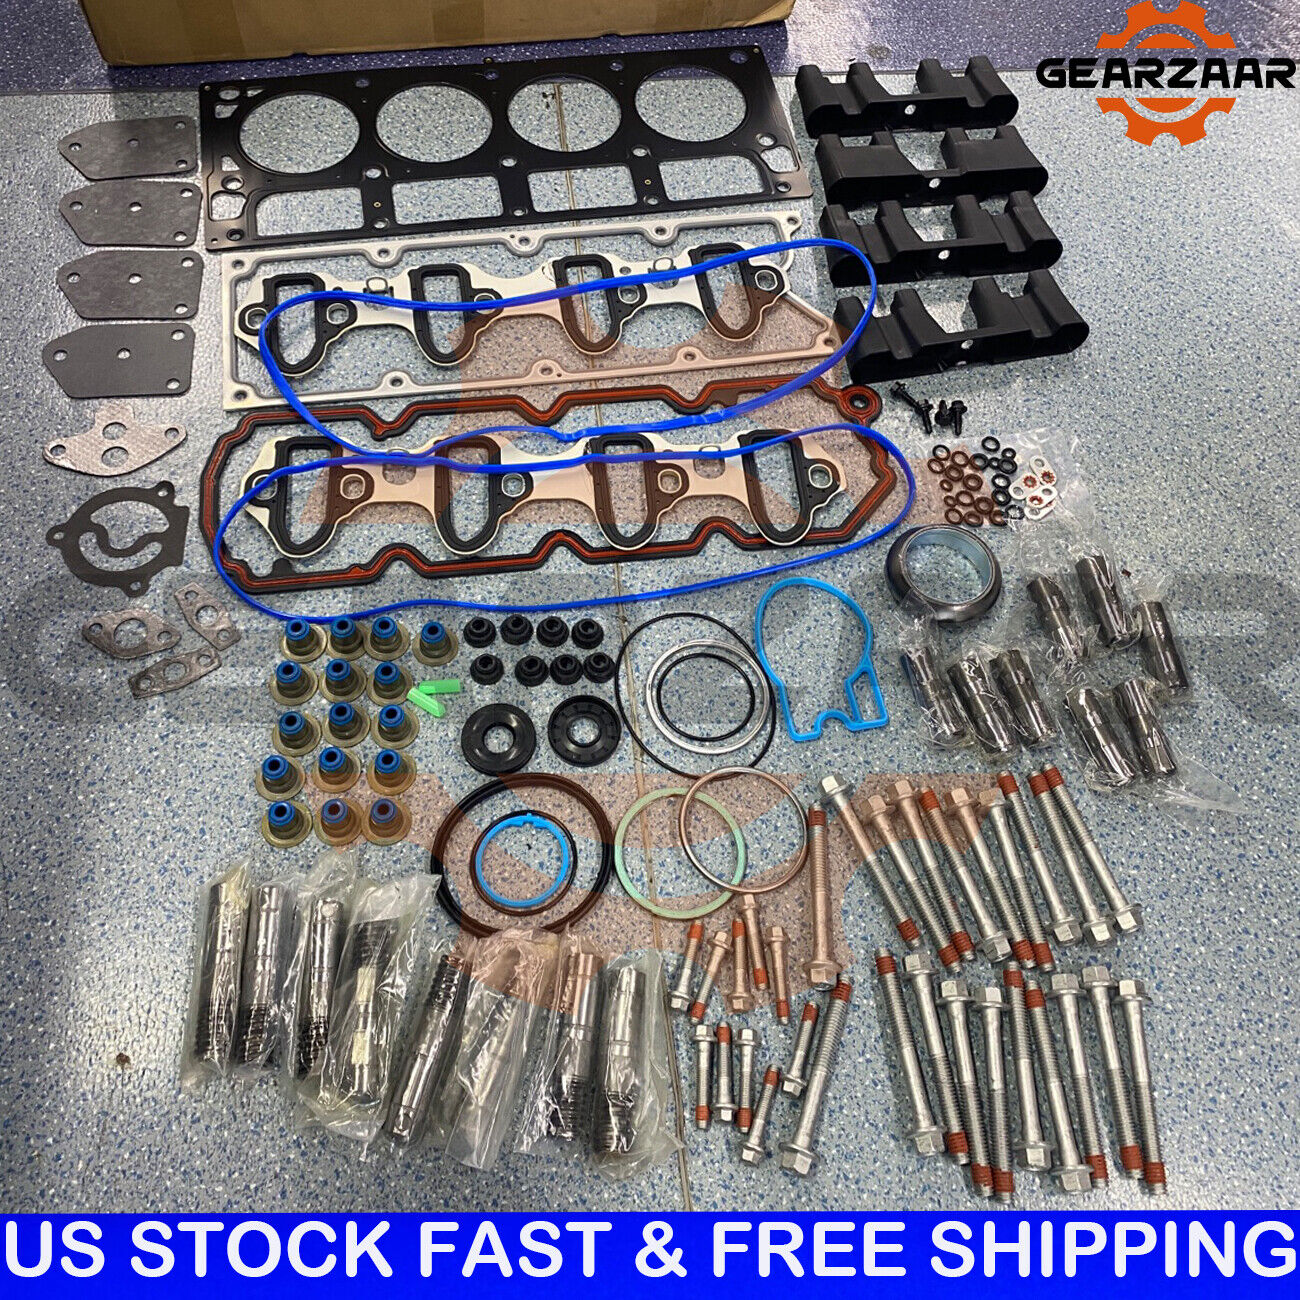 Chevrolet GM 5.3 AFM Lifter Kit Head Gasket Set, Head Bolts Lifters and Guides